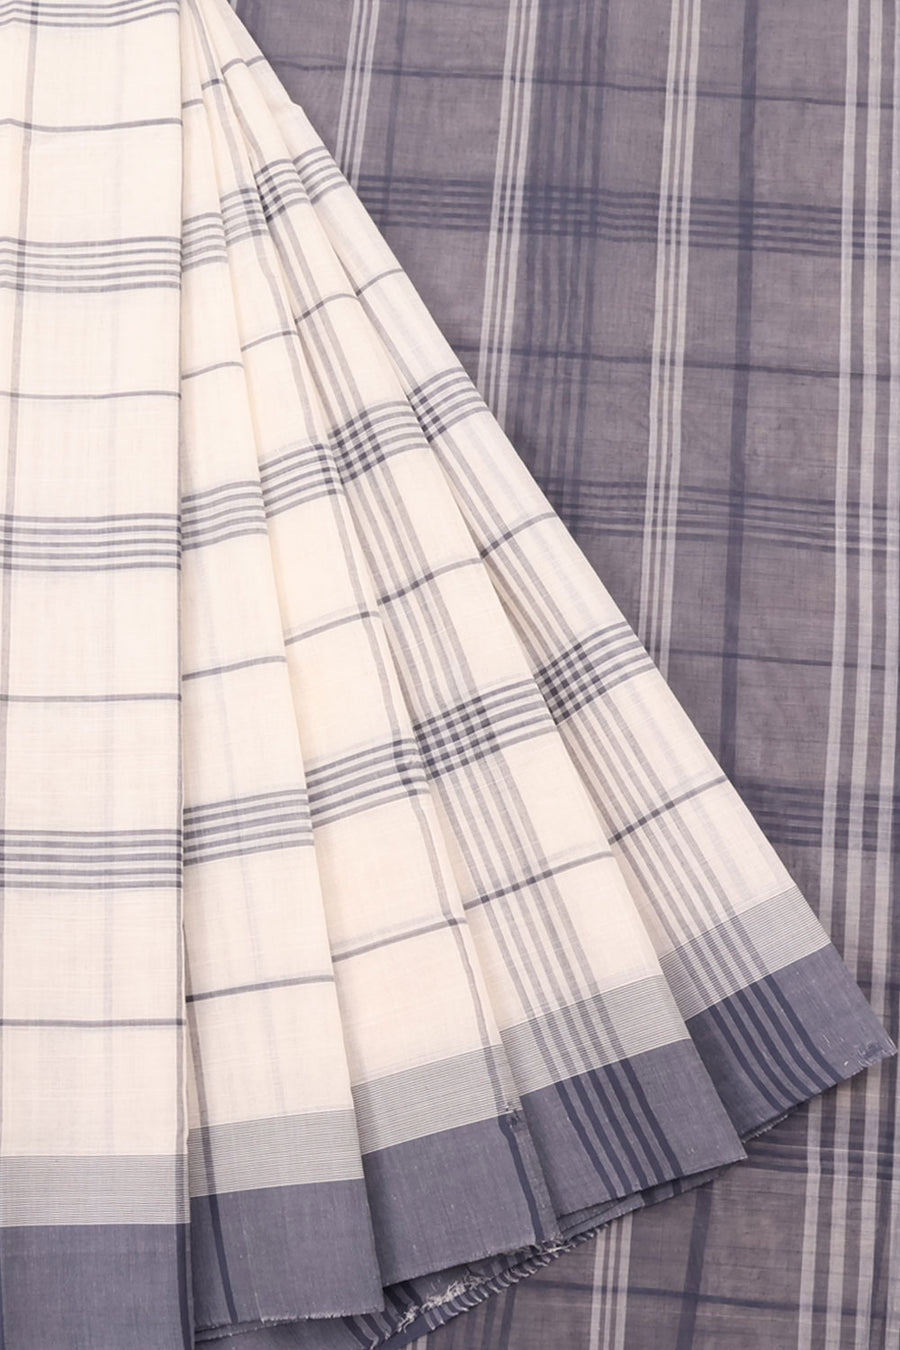 Handwoven Kanchi Cotton Saree with Checked and Stripes Design and Contrast Pallu